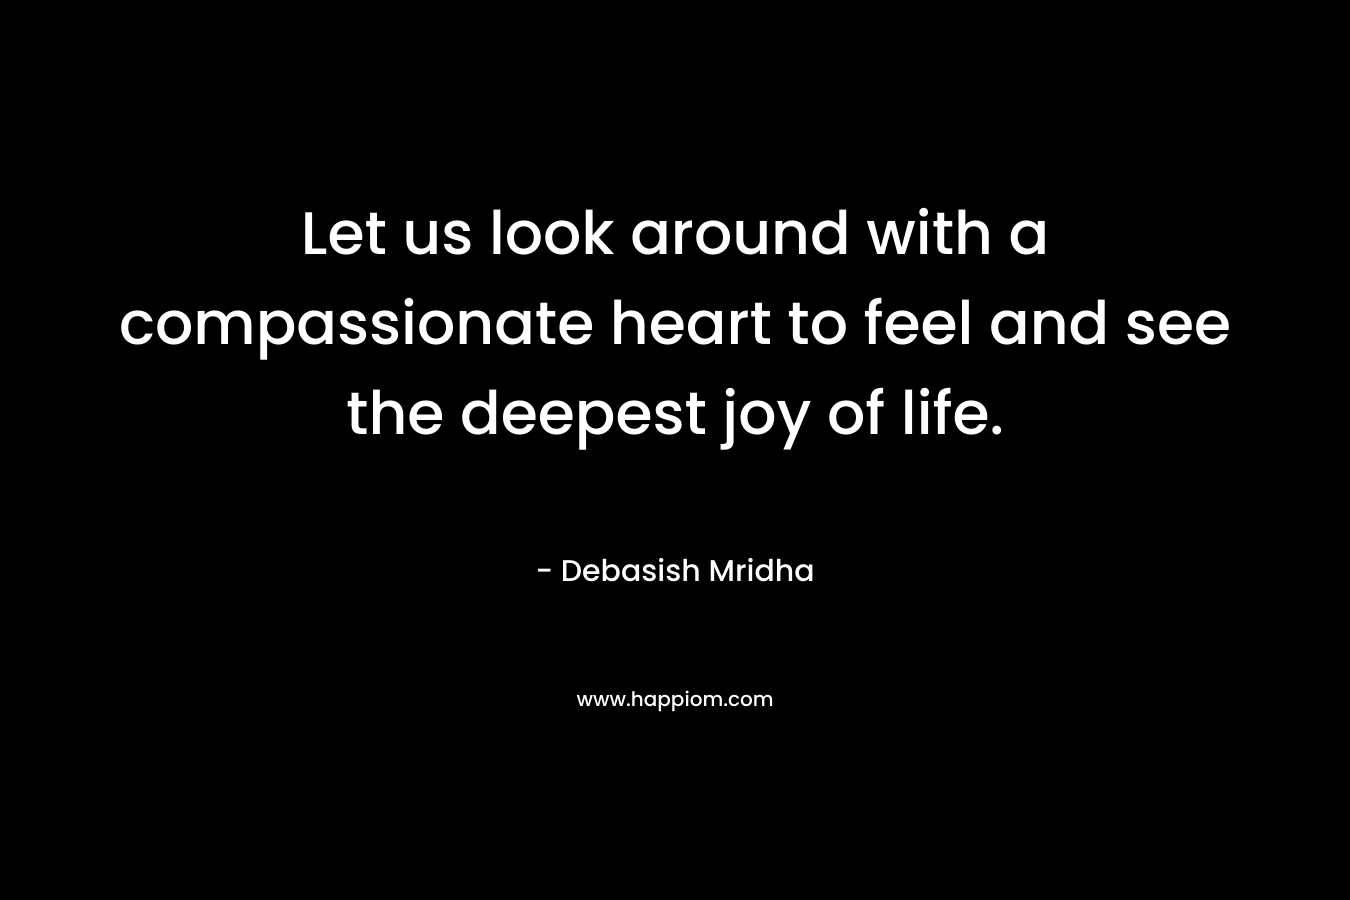 Let us look around with a compassionate heart to feel and see the deepest joy of life.